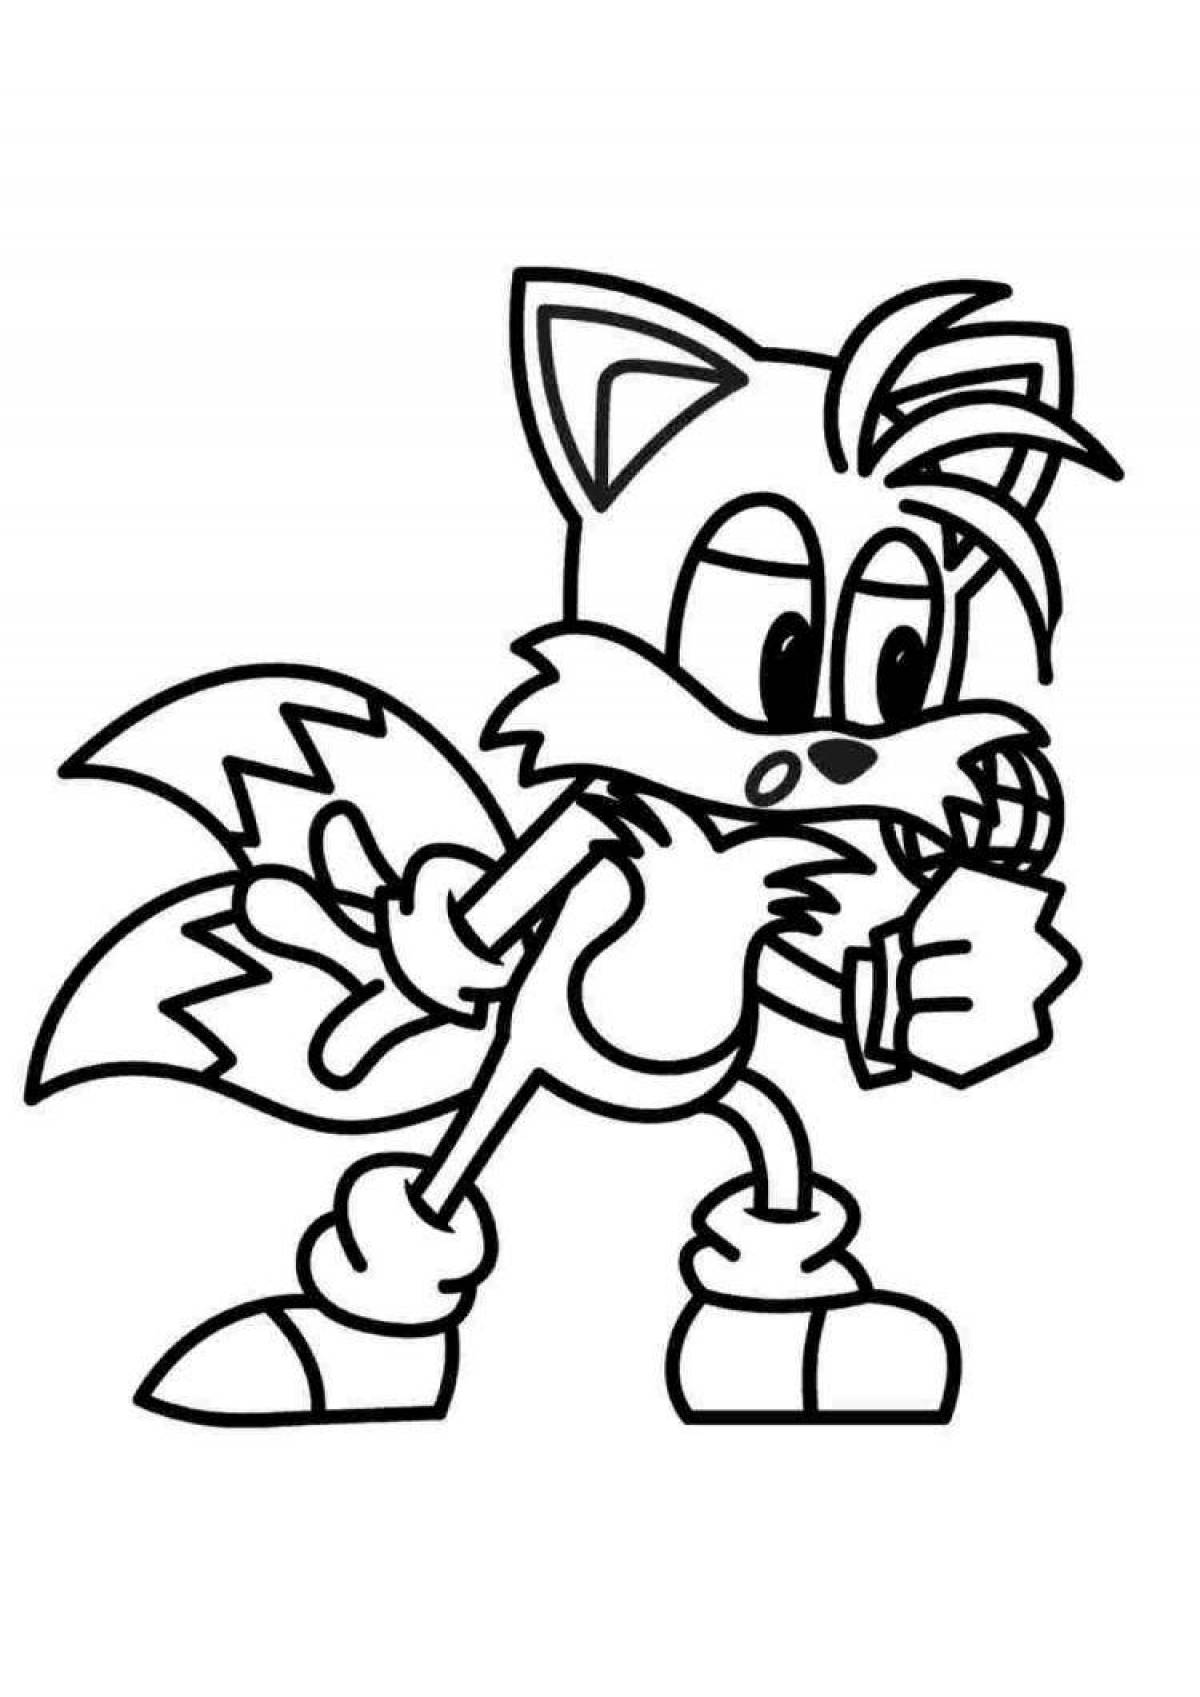 Charming sonic prime coloring book